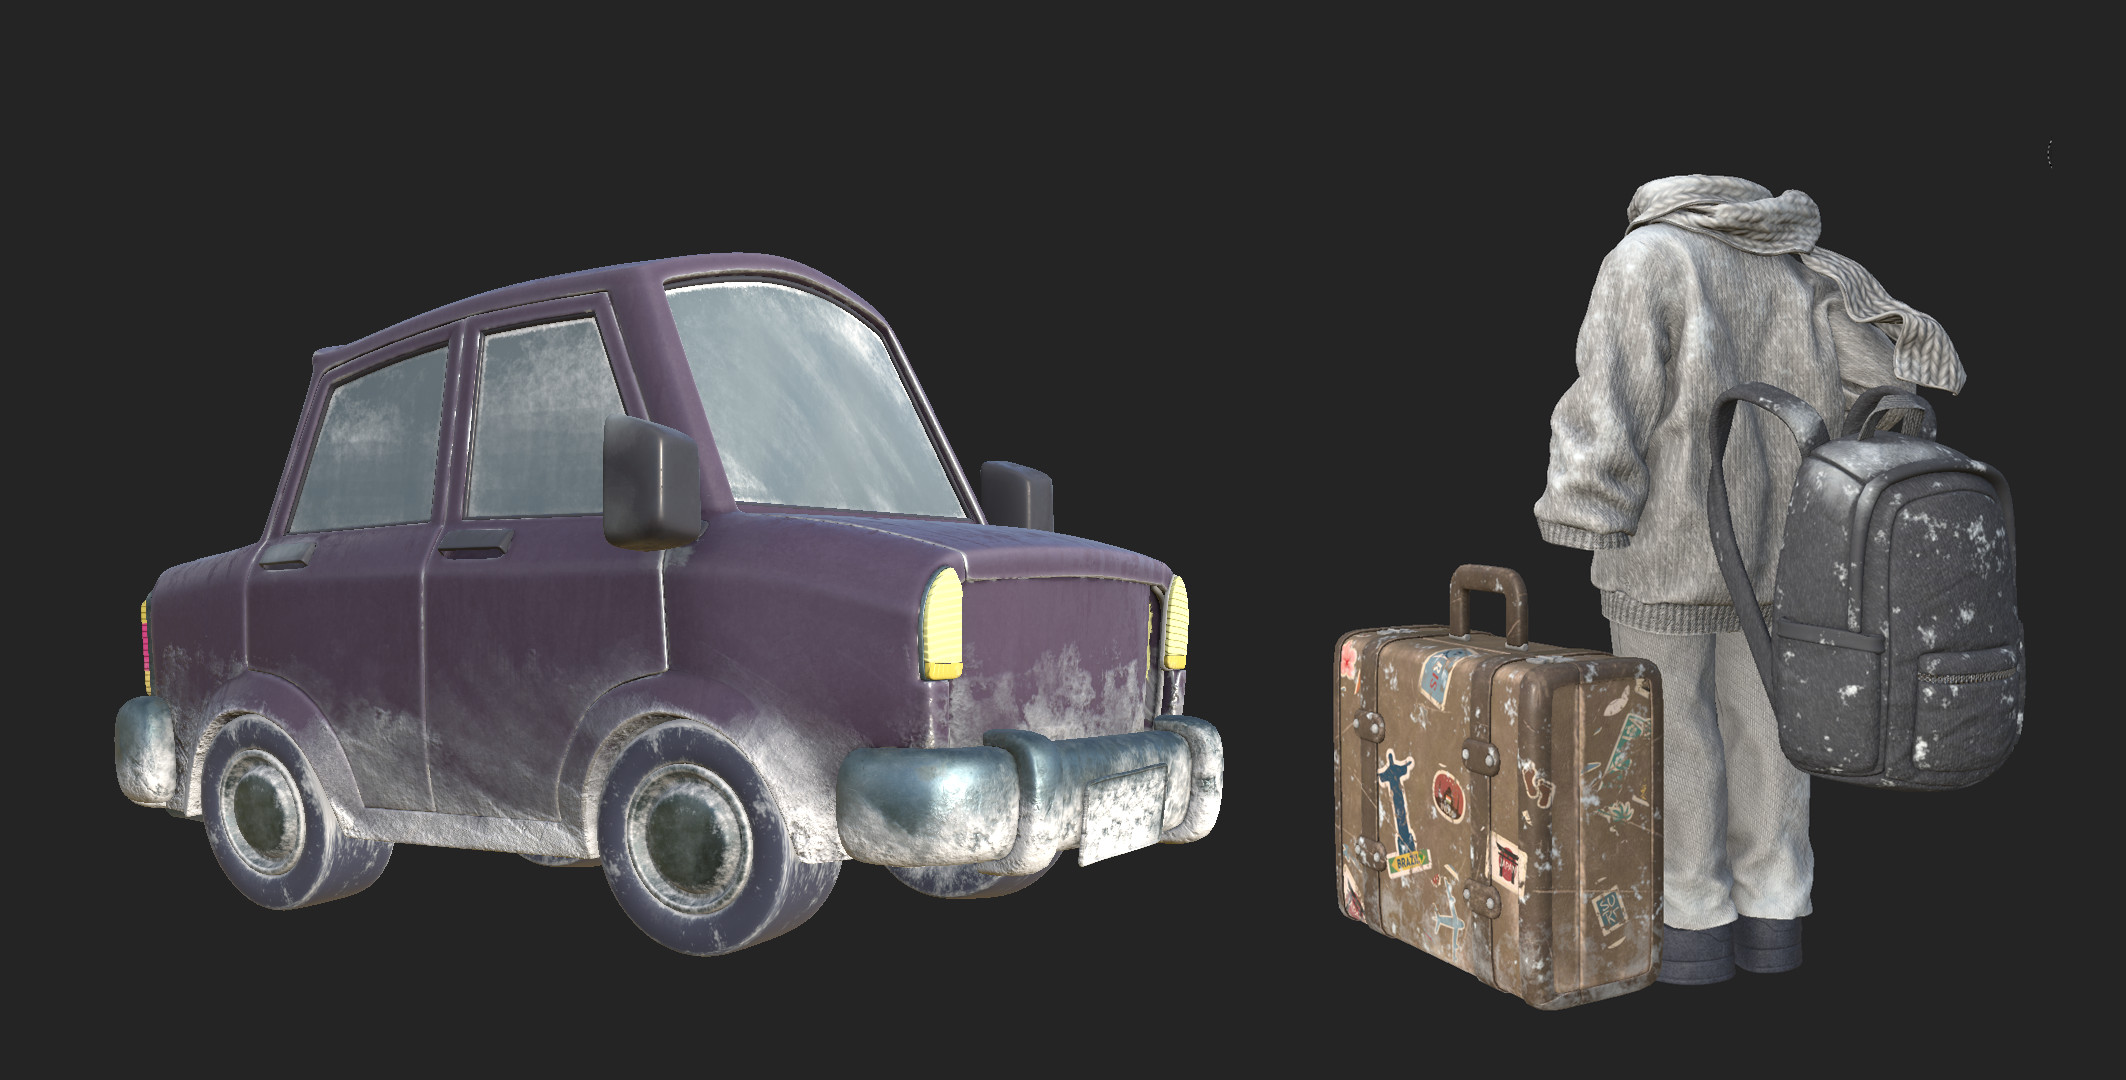 The only assets that I ended up using Substance Painter. I kept the character clothes gray because it was faster to fine tweak the color inside 3ds Max using Vray's IPR